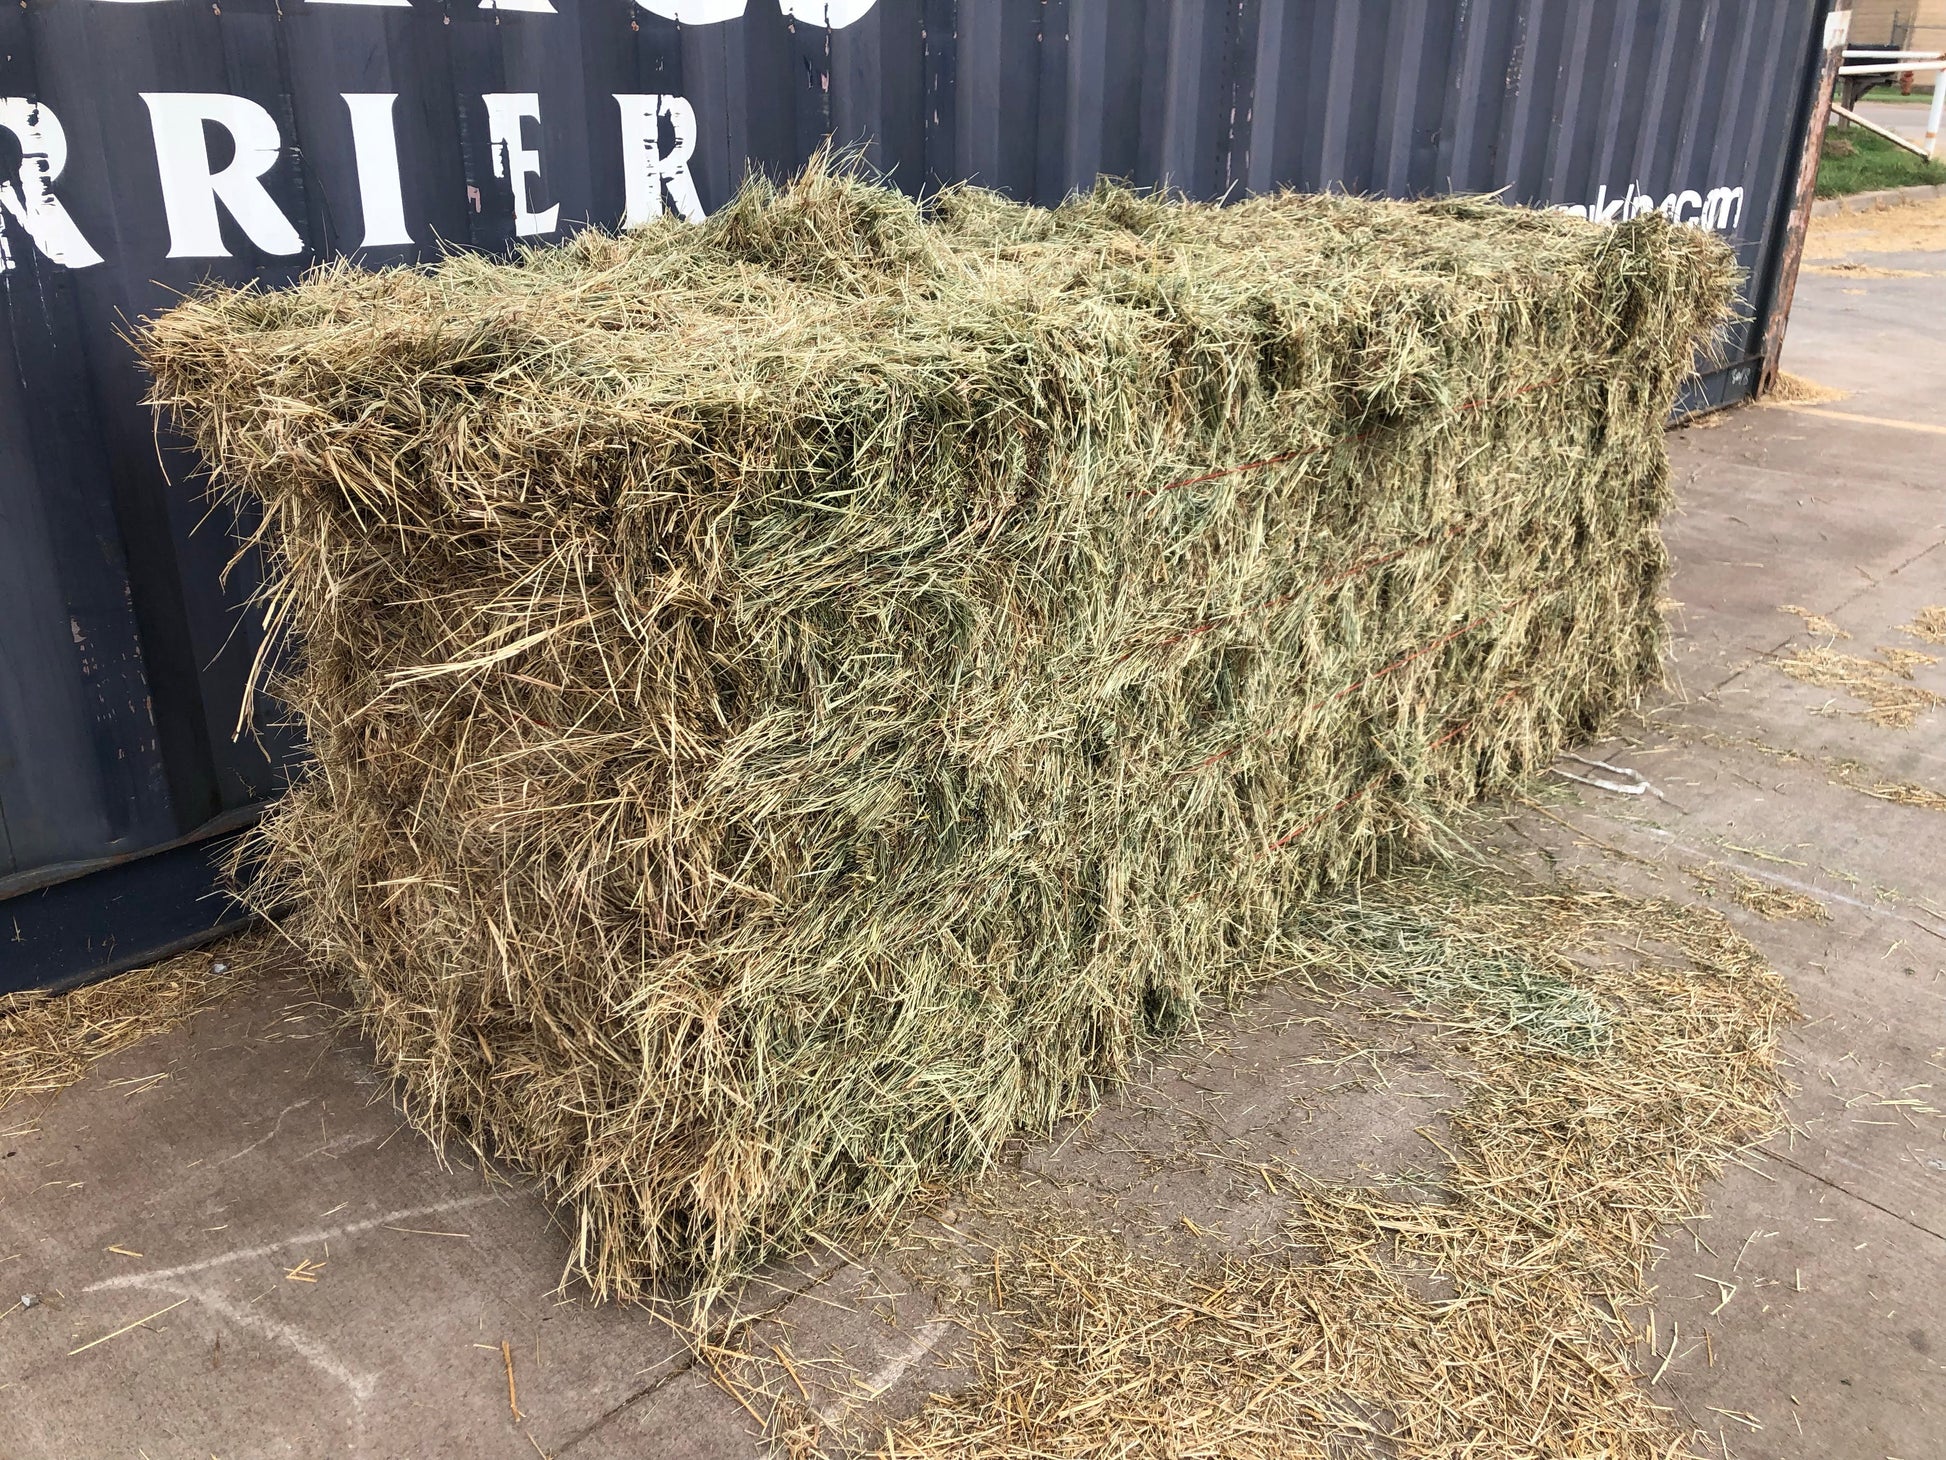 Bermuda Grass is a less expensive alternative to Orchard or Timothy hay for those horses that are fed grain or supplements.  With less protein than alfalfa, 8% - 10%, it is an excellent source of roughage for all types of livestock. 